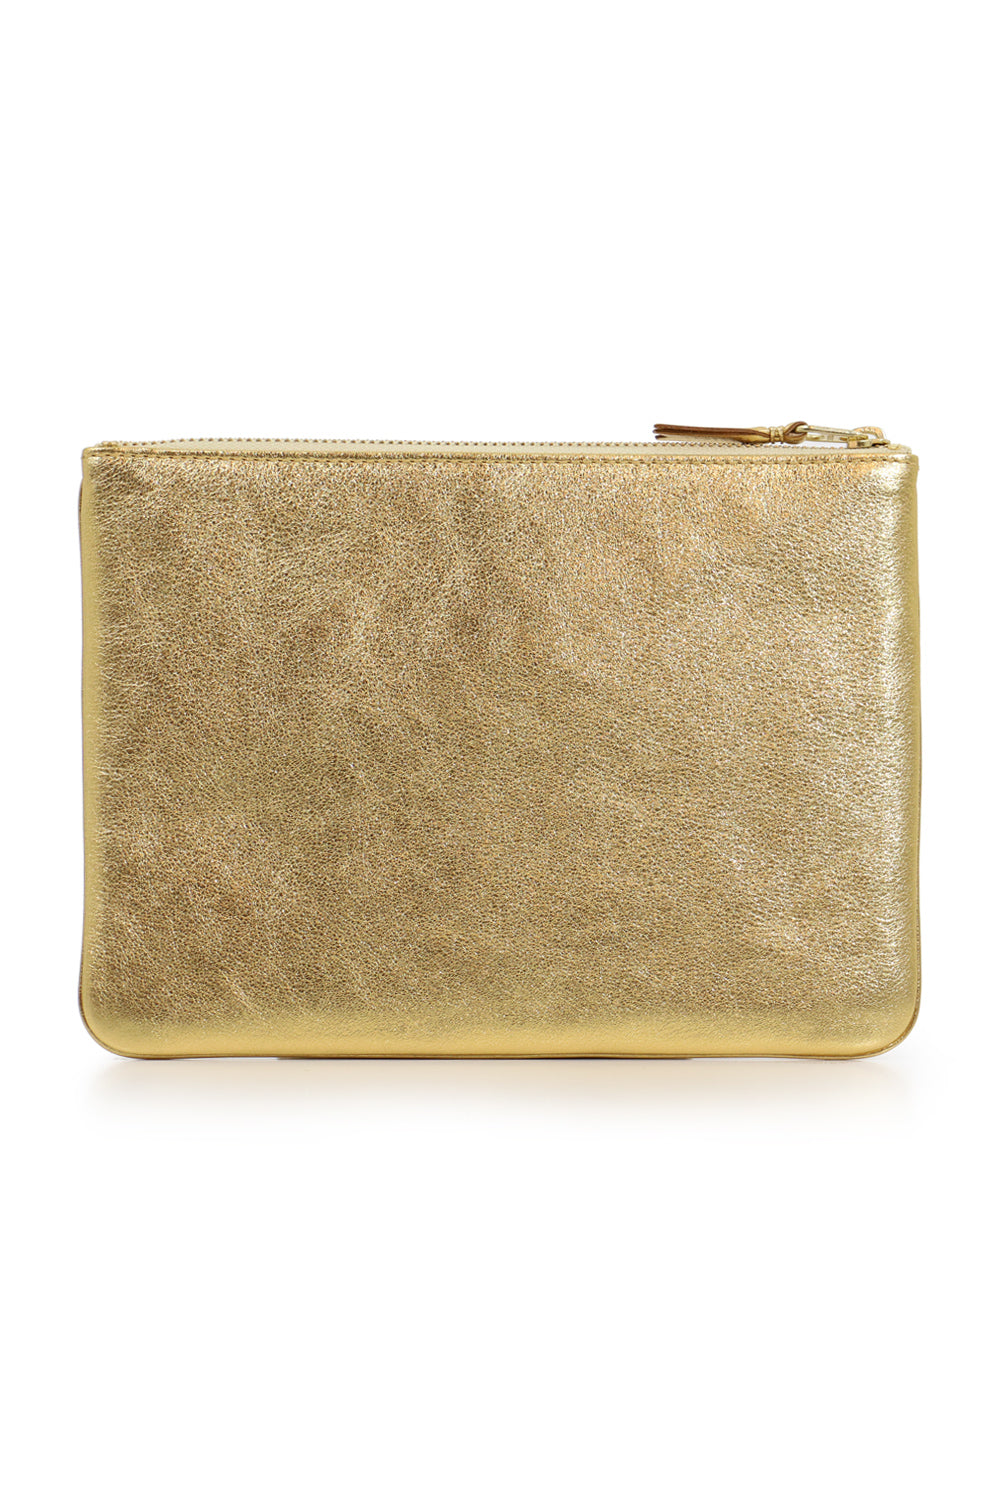 COMME DES GARCONS BAGS GOLD CLASSIC LEATHER POUCH GOLD